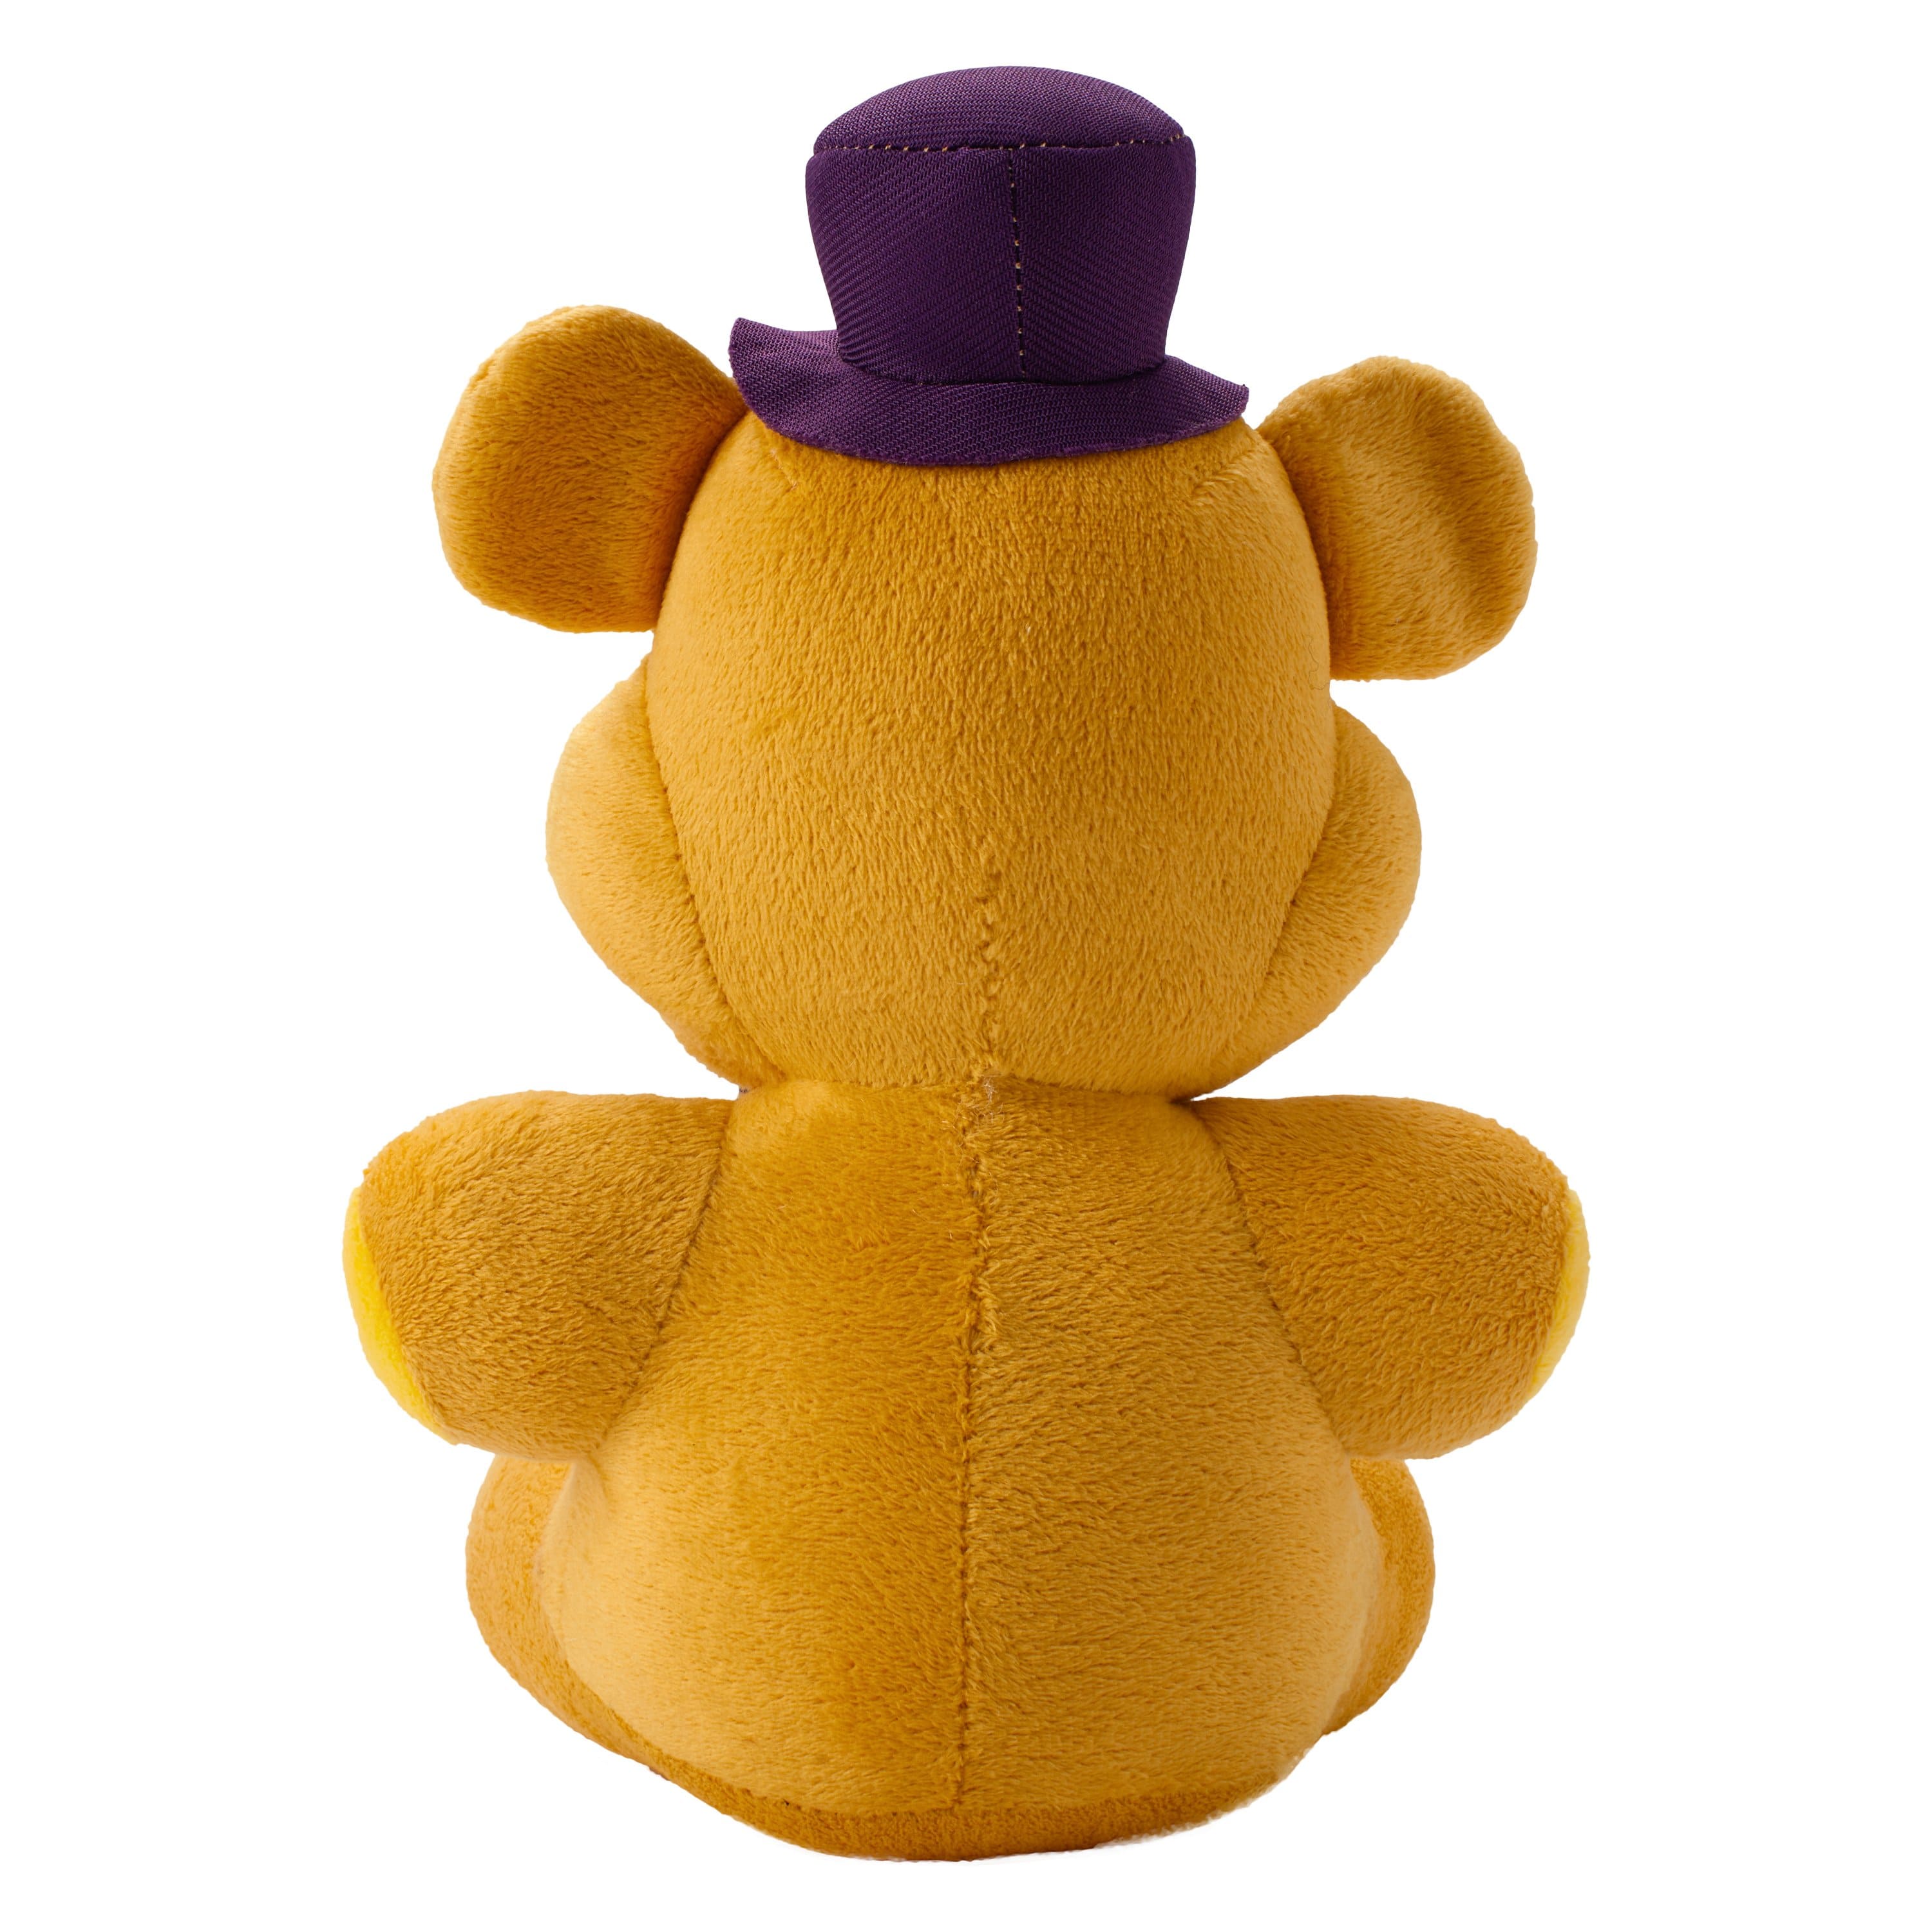 FNAF Plushie Five Nights at Freddy's Toys 7 Plush Golden Bear US Stock